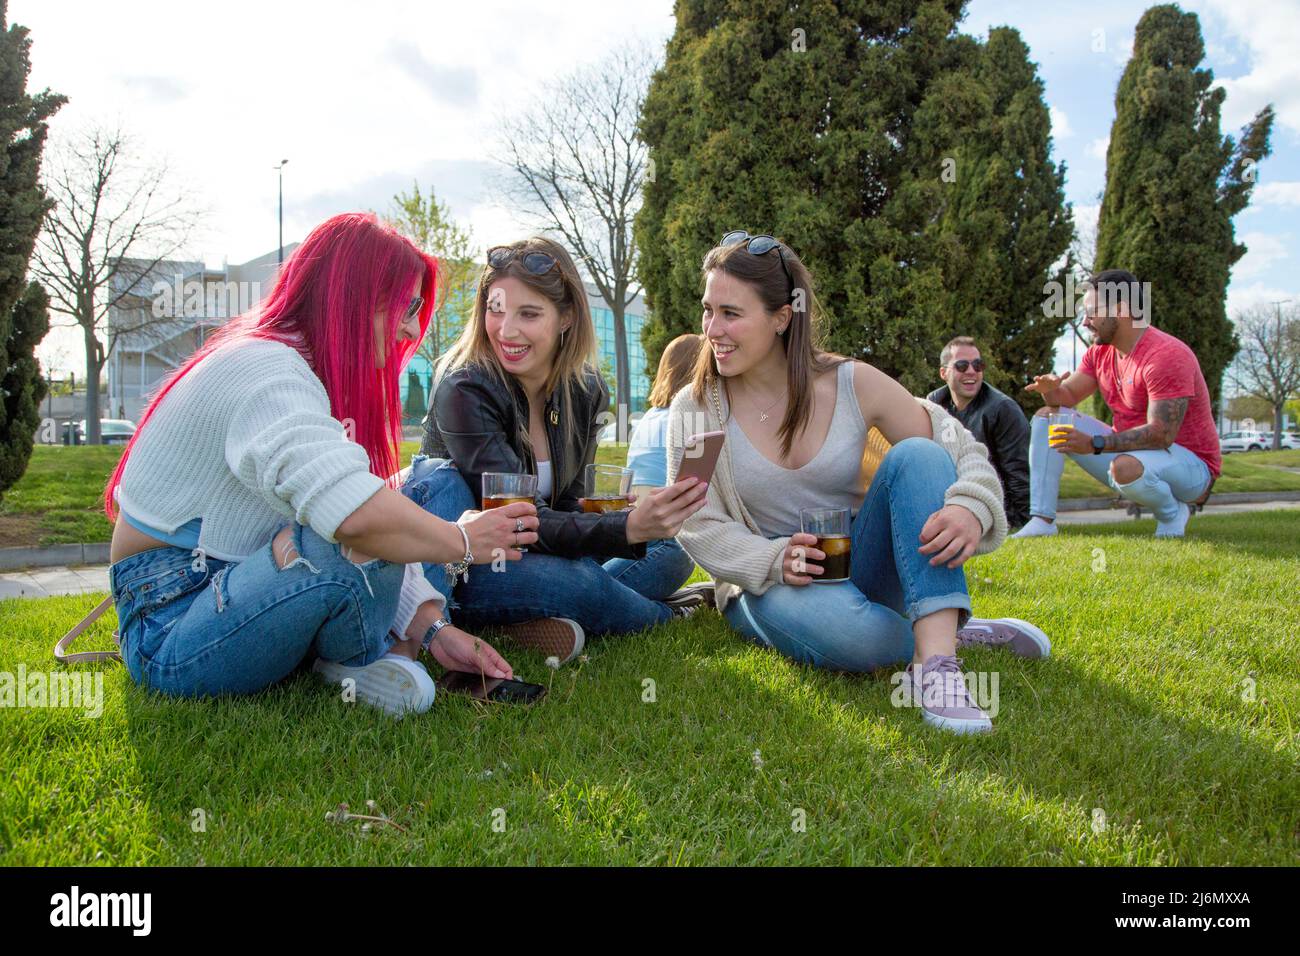 groups of friends having fun in a park Stock Photo